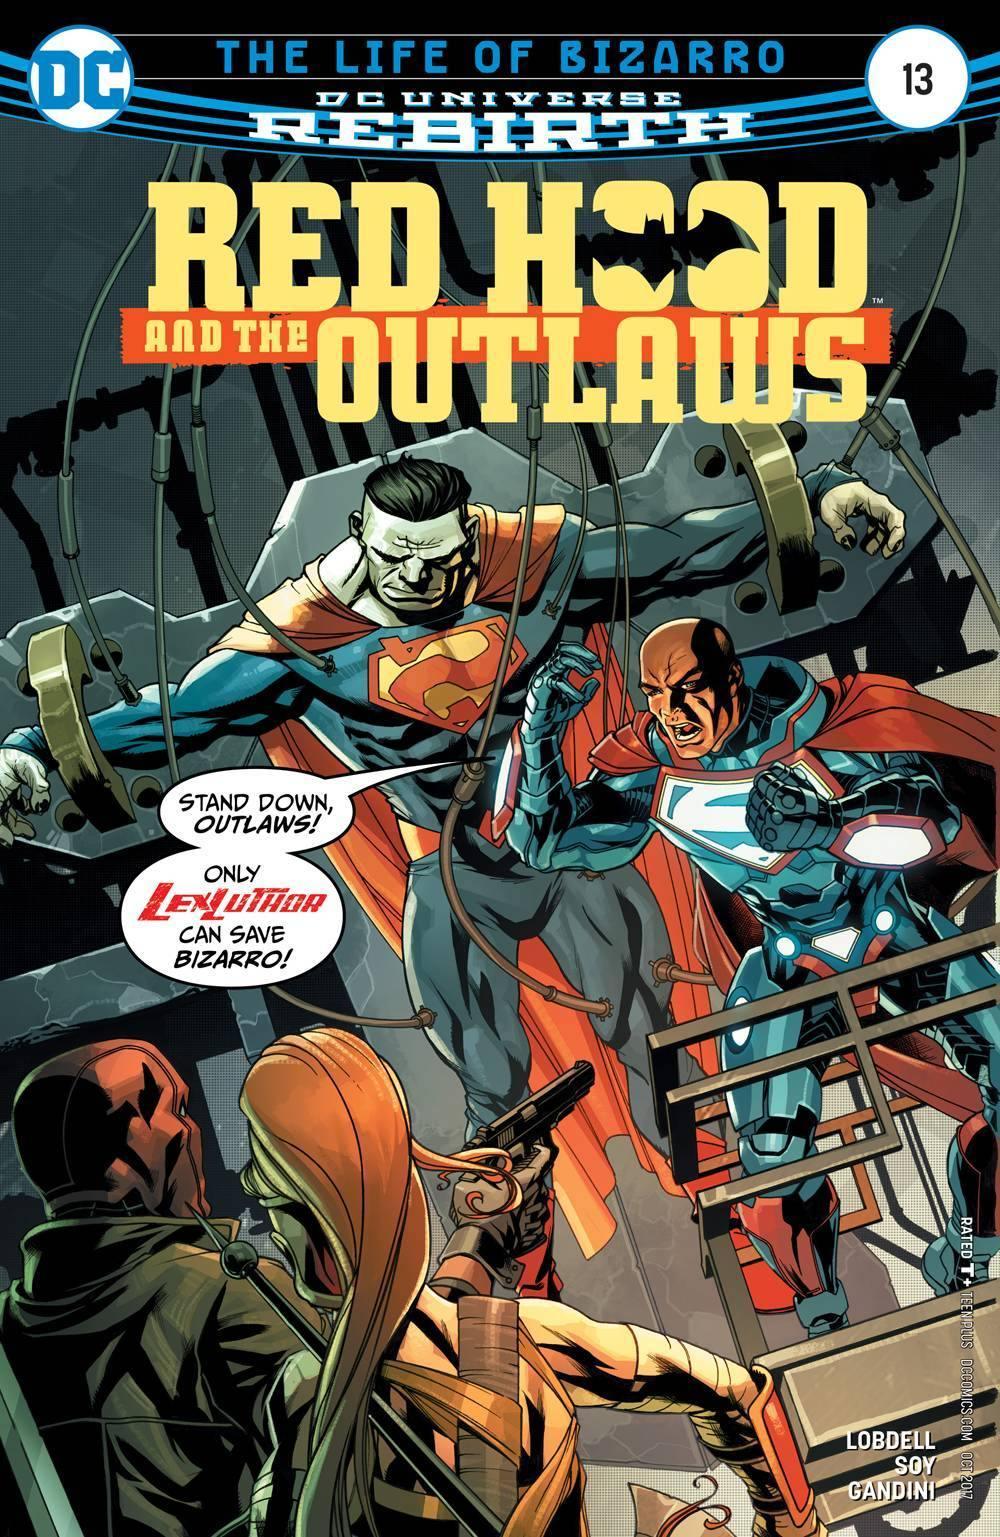 RED HOOD AND THE OUTLAWS VOL 2 #13 - Kings Comics